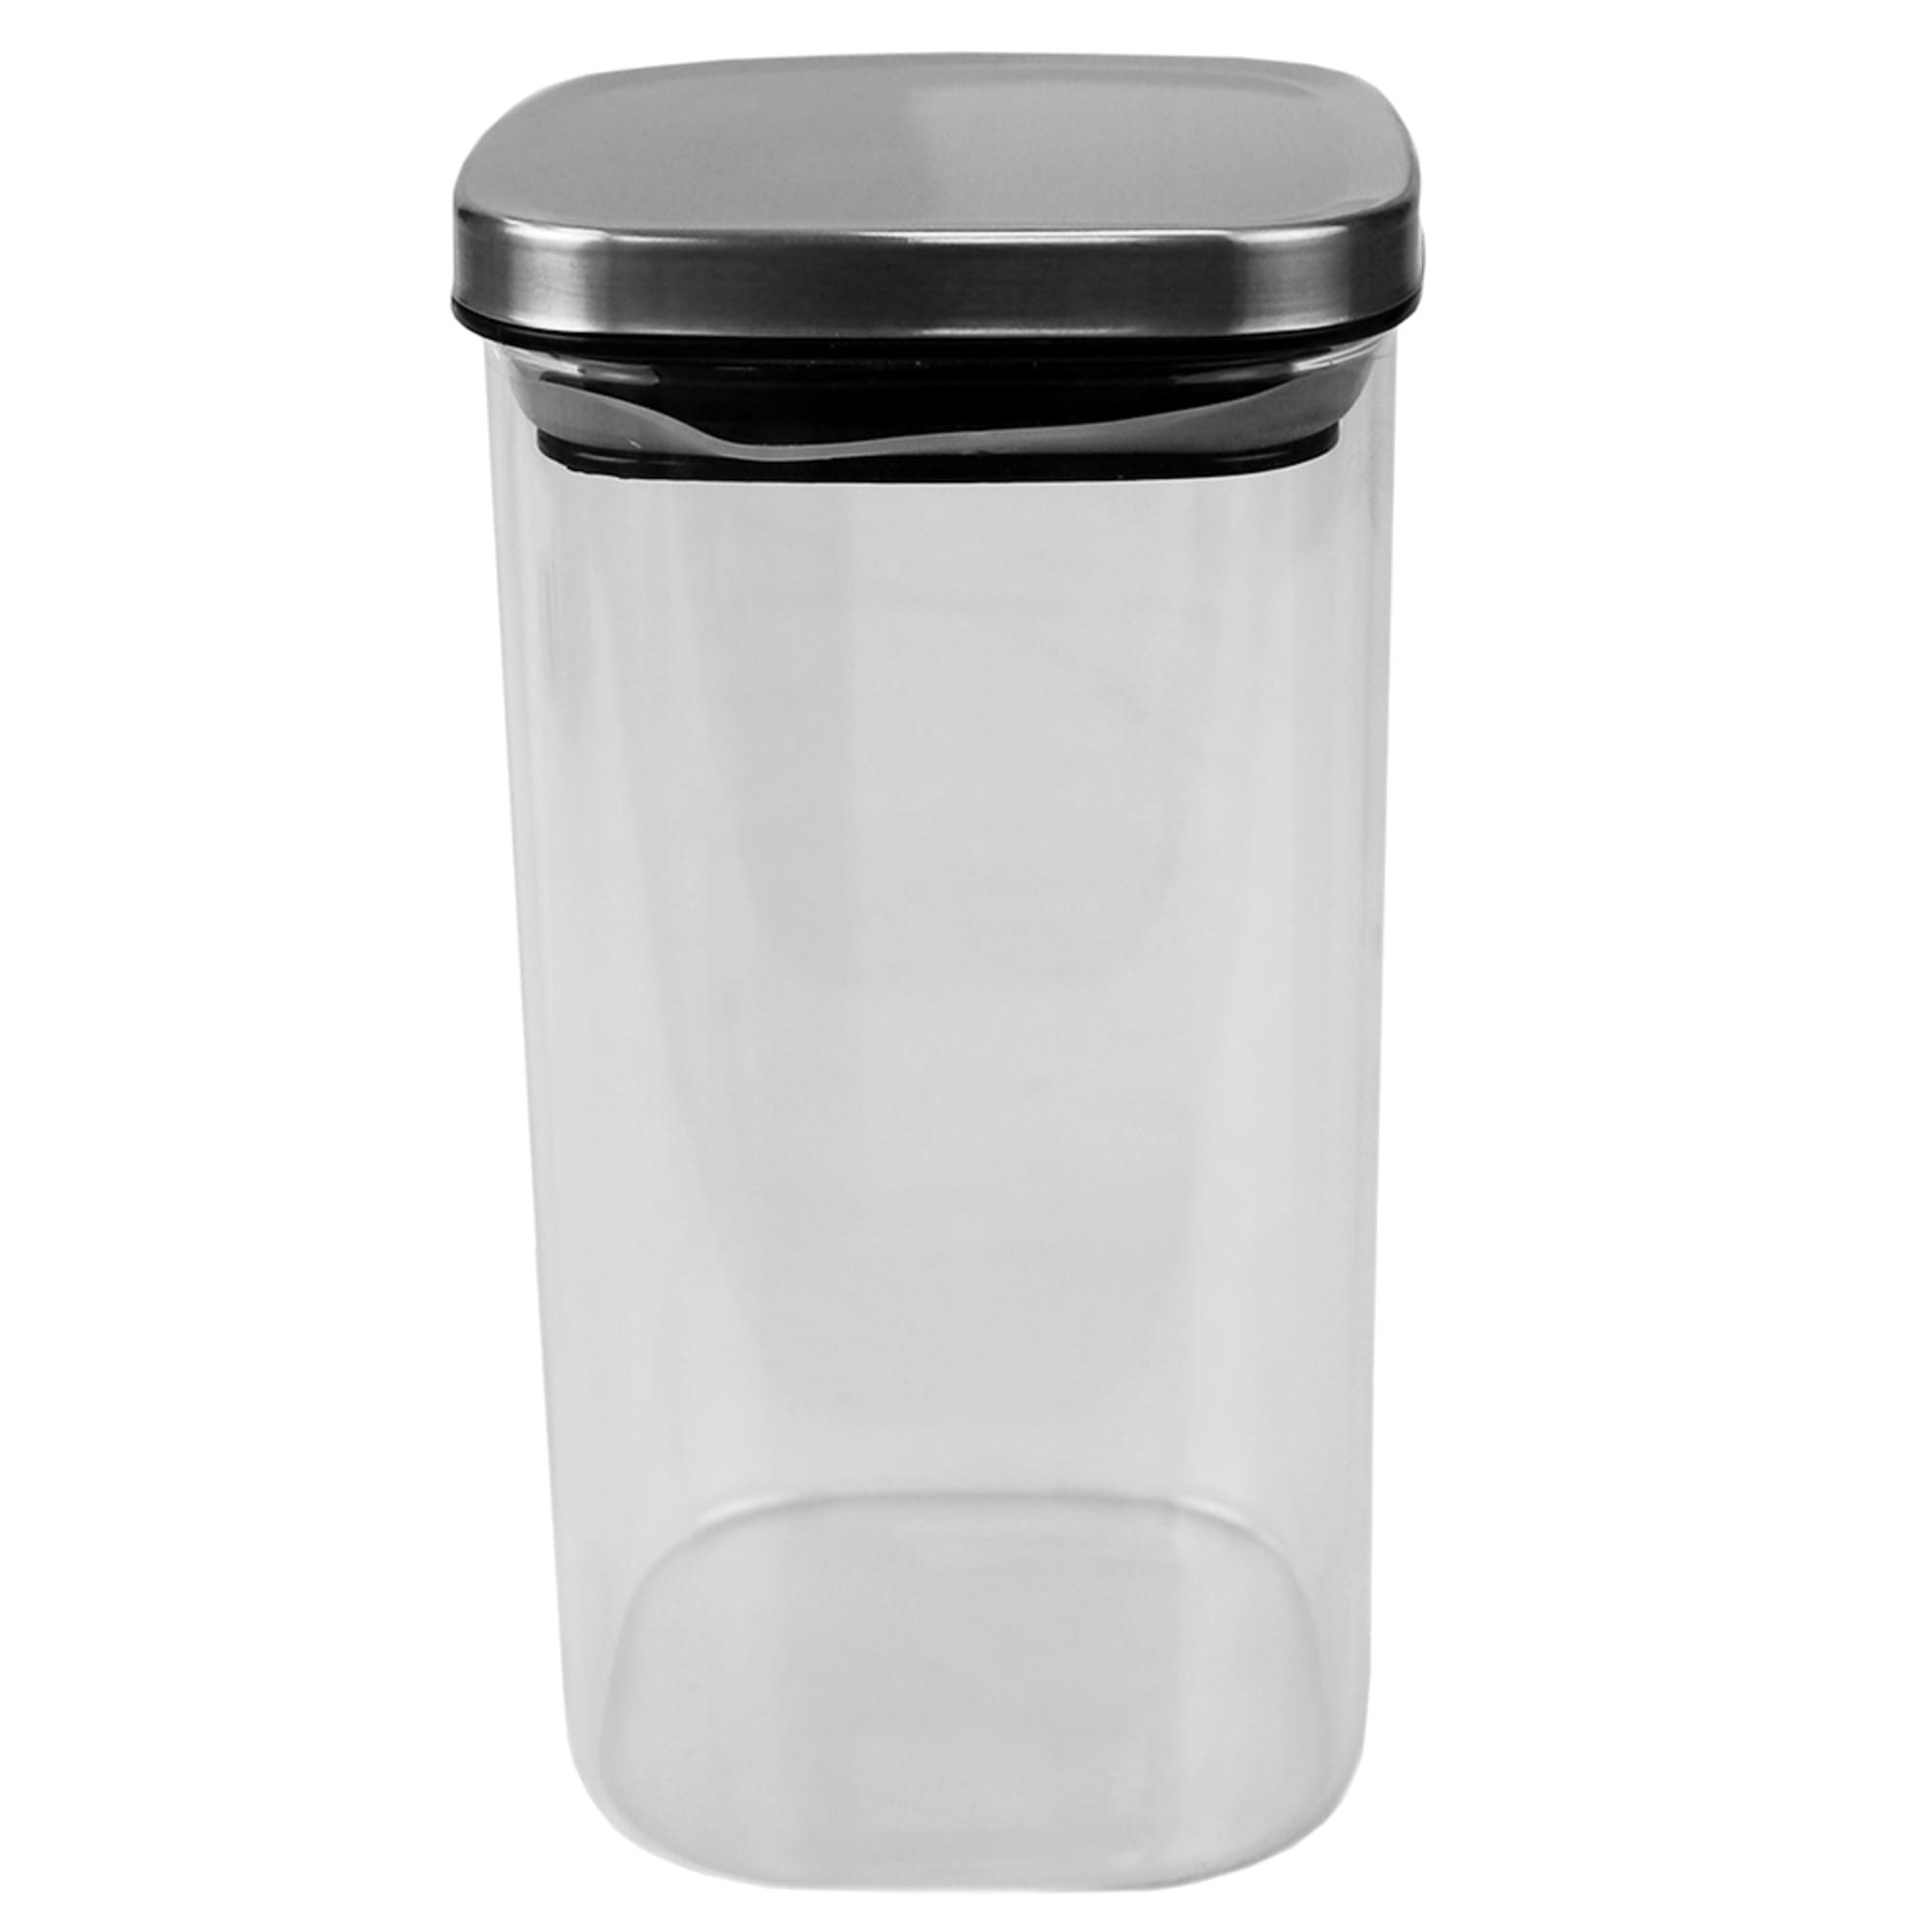 Michael Graves Design Large 47 Ounce Square Borosilicate Glass Canister with Stainless Steel Top $6.00 EACH, CASE PACK OF 12